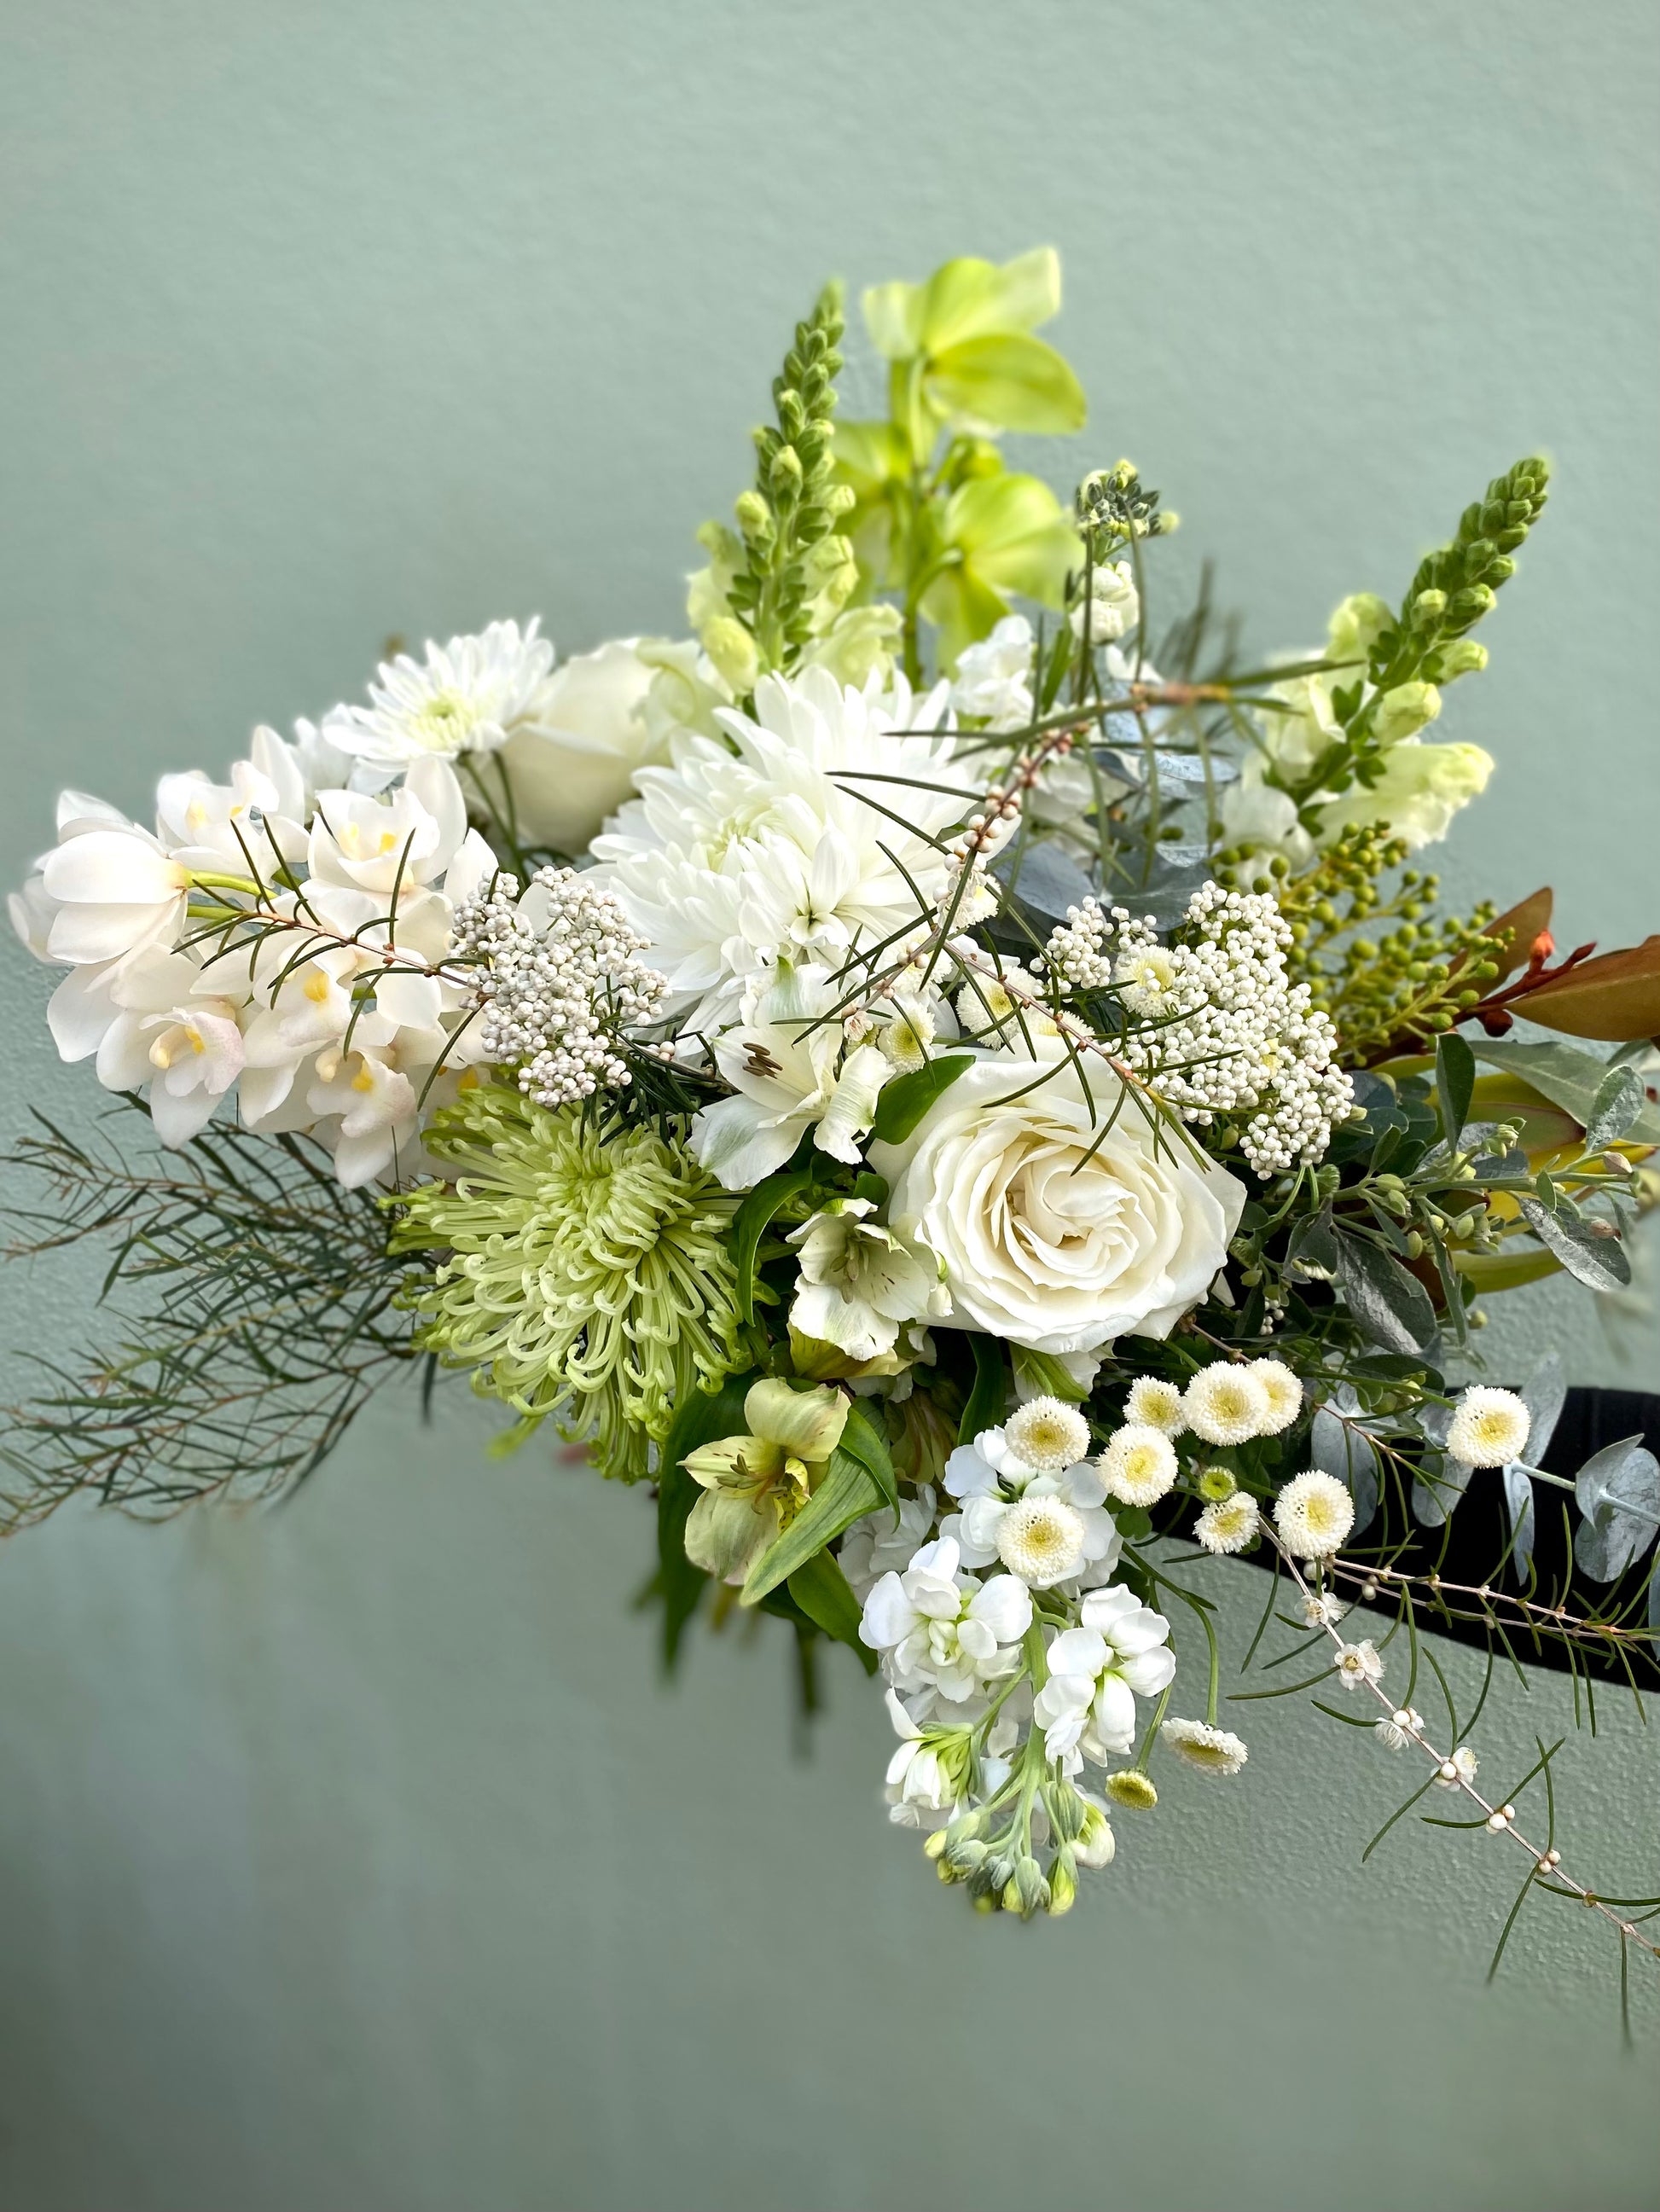 Green, white and cream bouquet